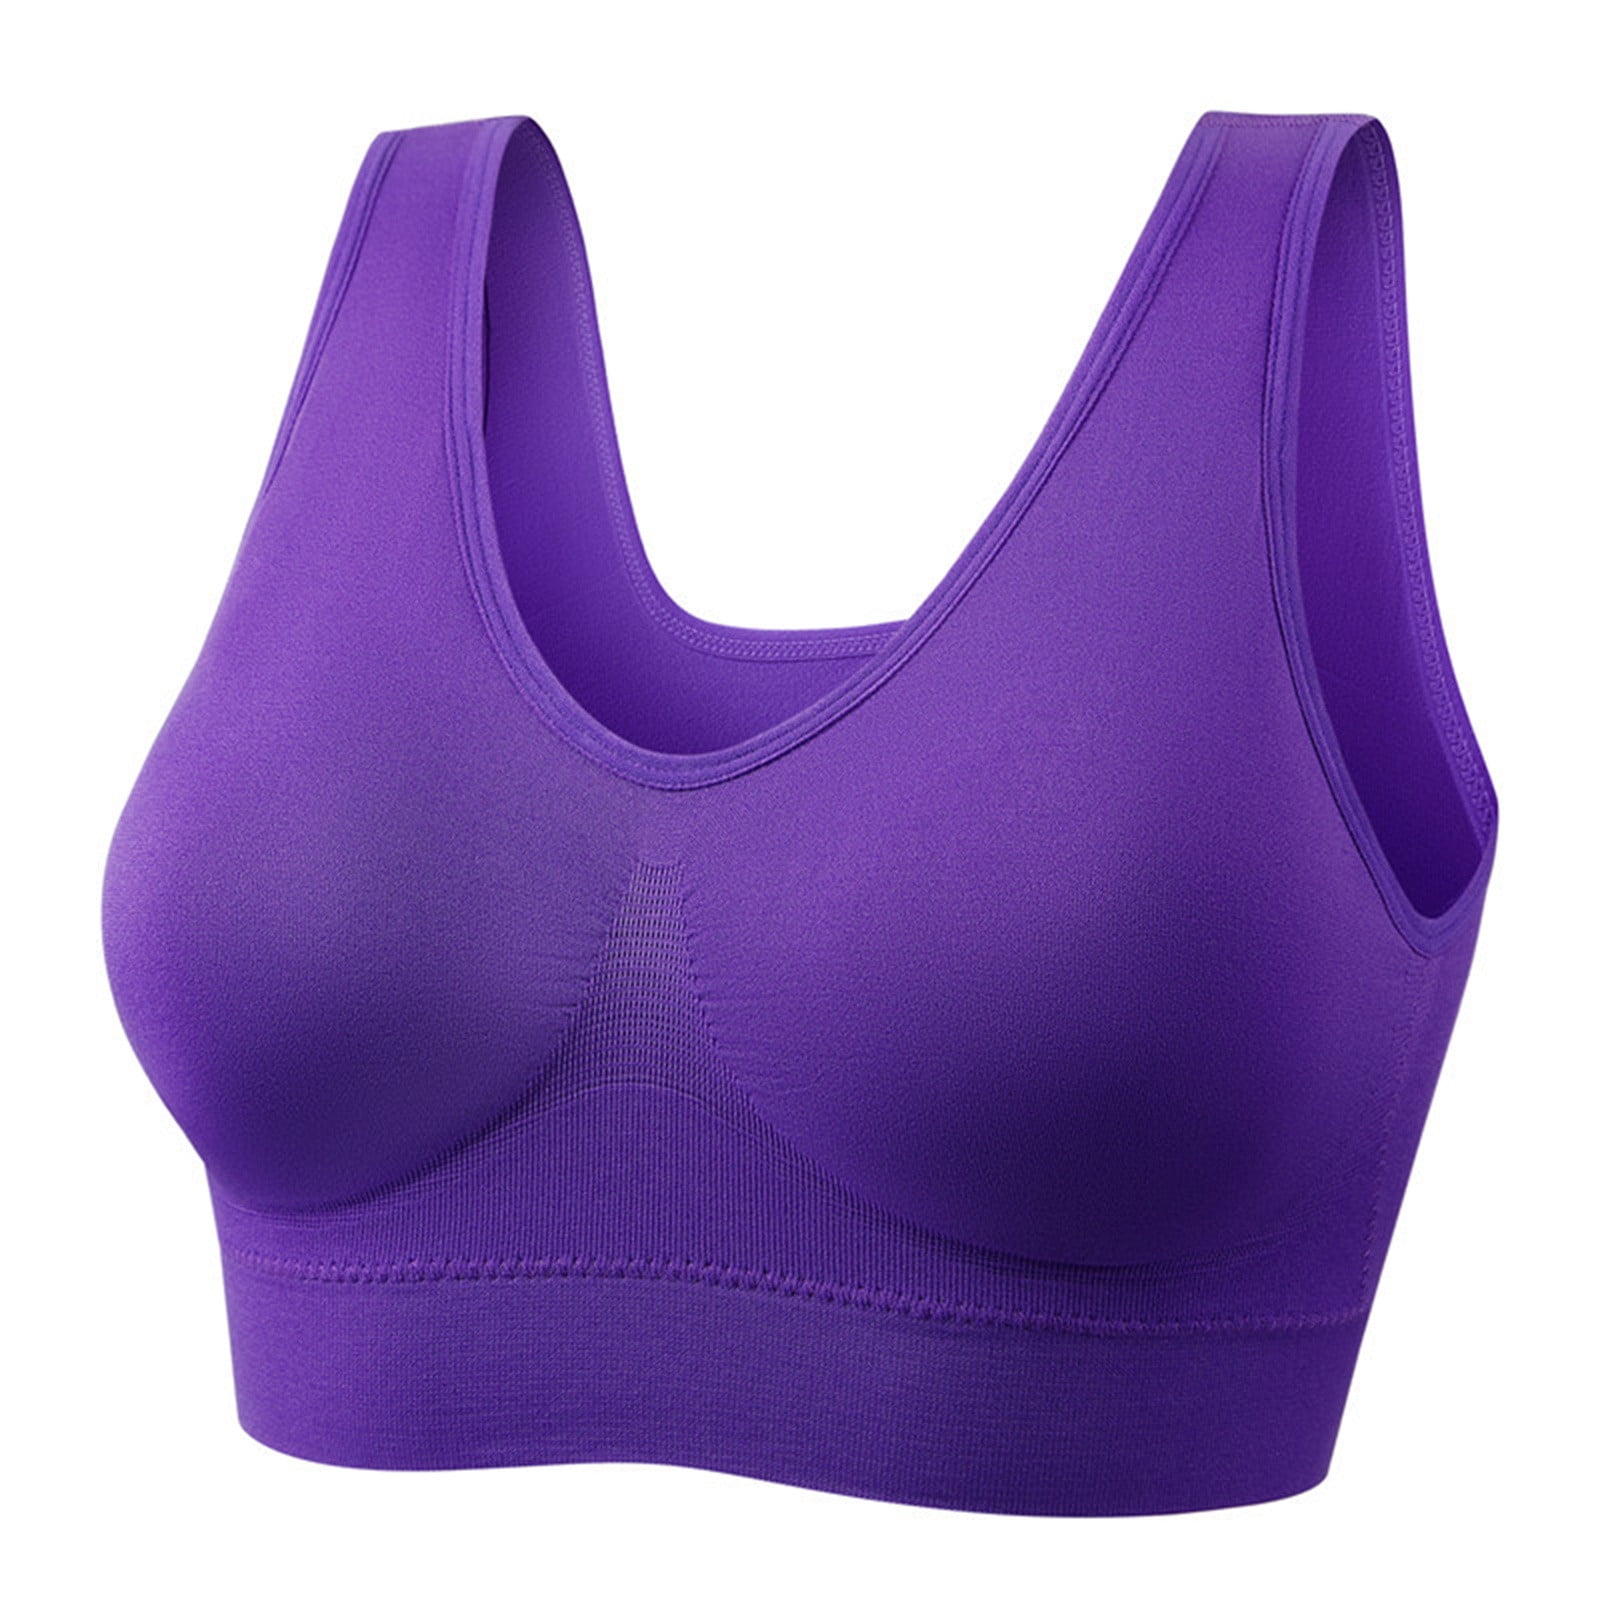 KDDYLITQ Plus Size Sports Bras for Women 4x-5x Push Up T-Shirt Bralette  Support Yoga T Shirt Bras for Women Full Coverage Seamless Minimizer Bra  Red 5X 